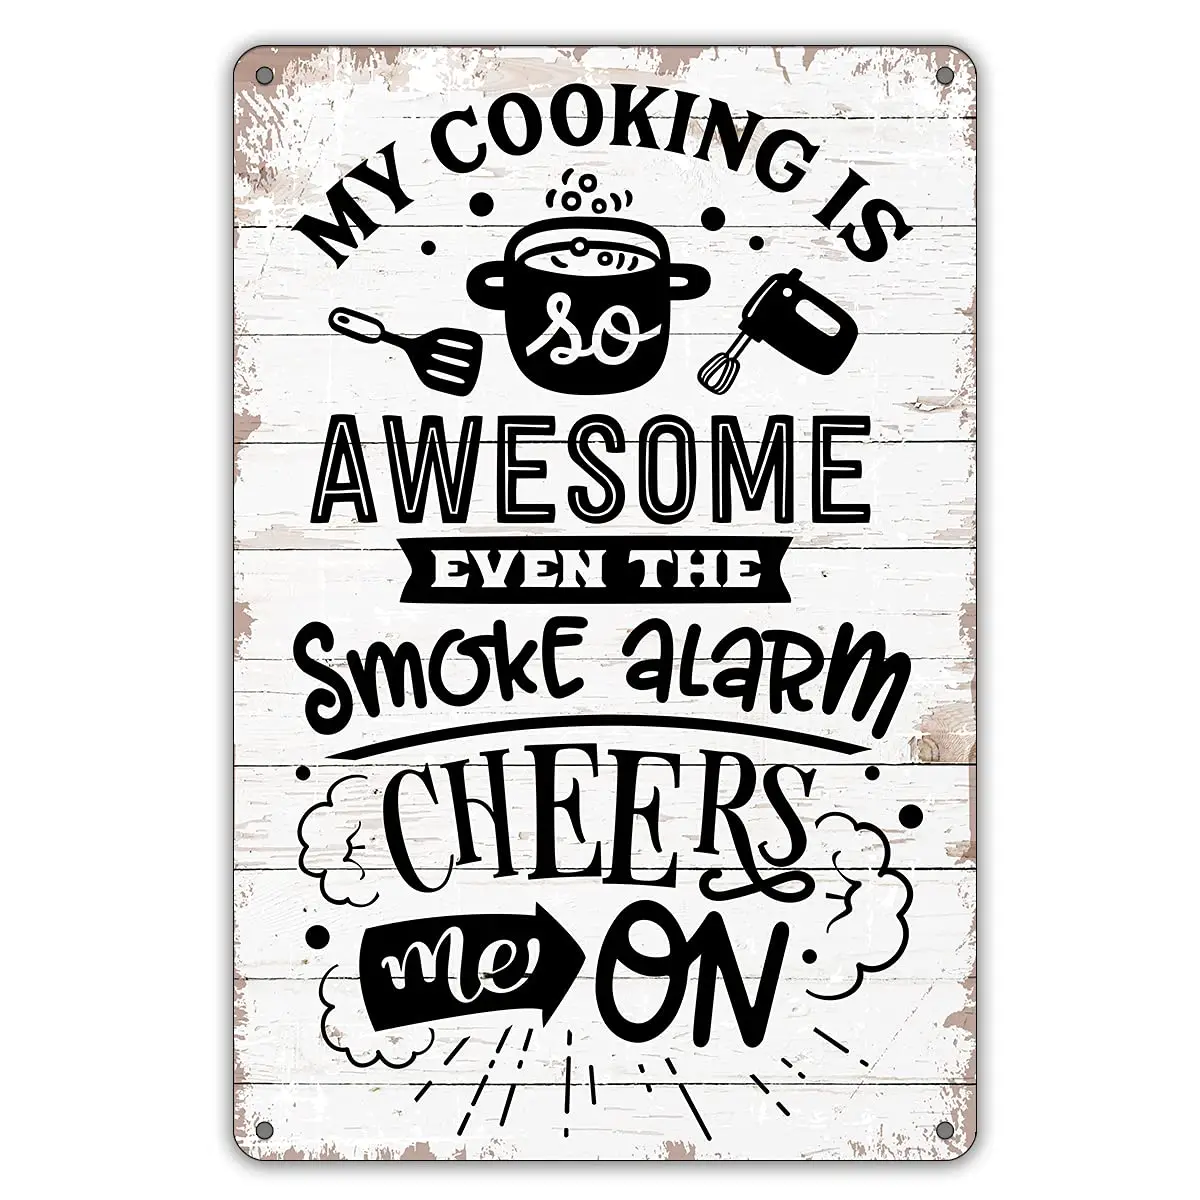 

My Cooking is Awesome Metal Tin Sign Wall Decor Retro Signs with Sayings for Home Decor Gifts